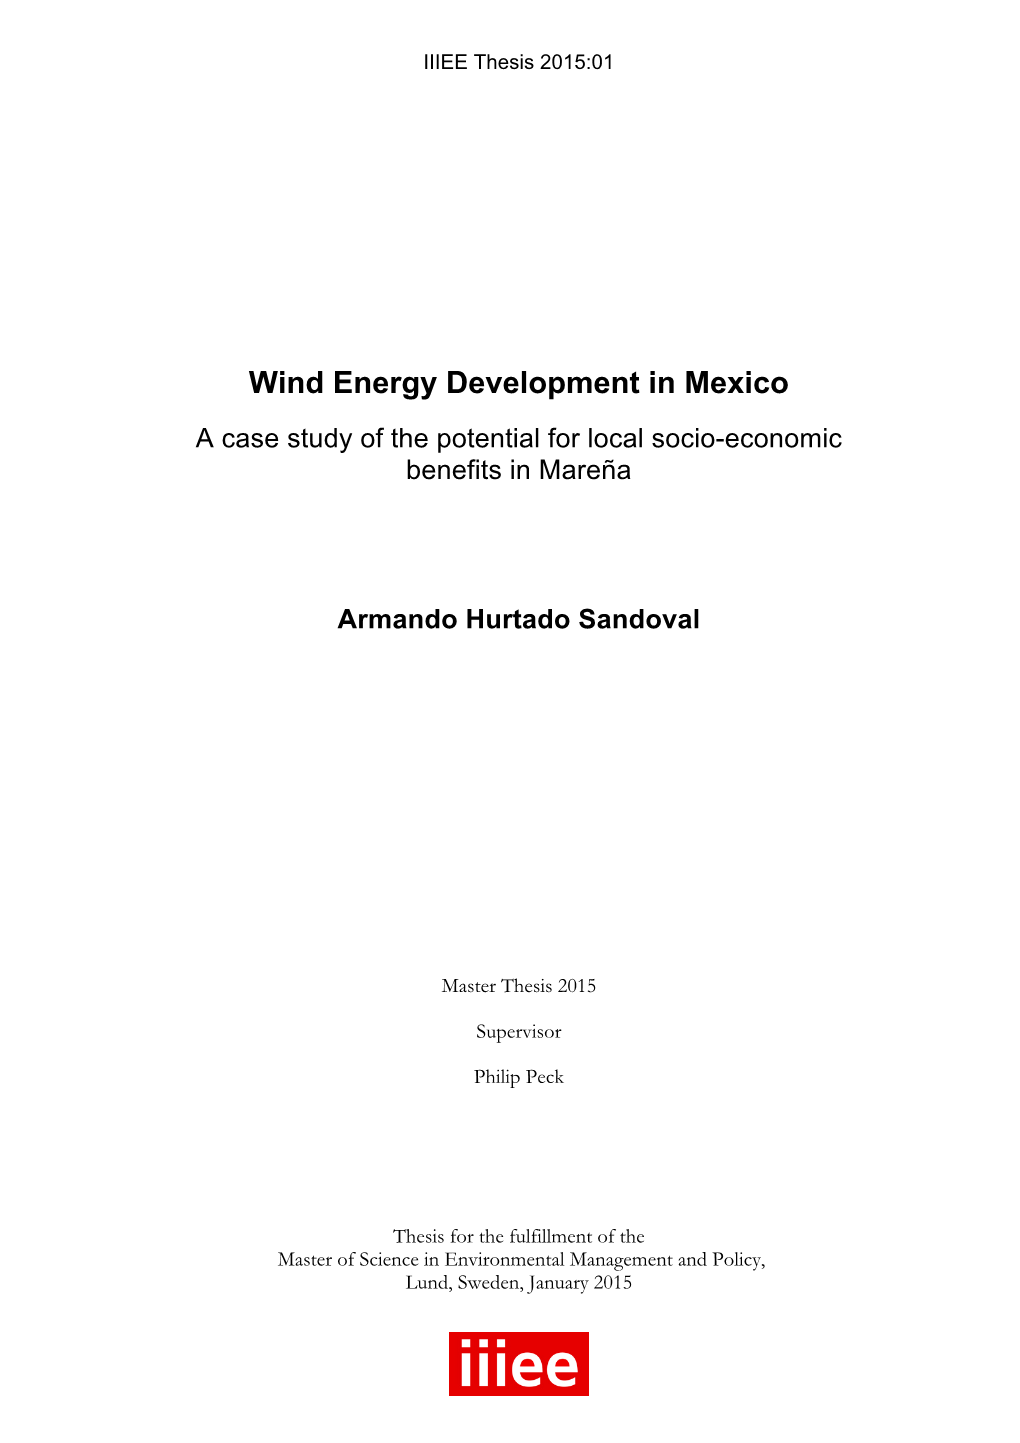 Wind Energy Development in Mexico a Case Study of the Potential for Local Socio-Economic Benefits in Mareña